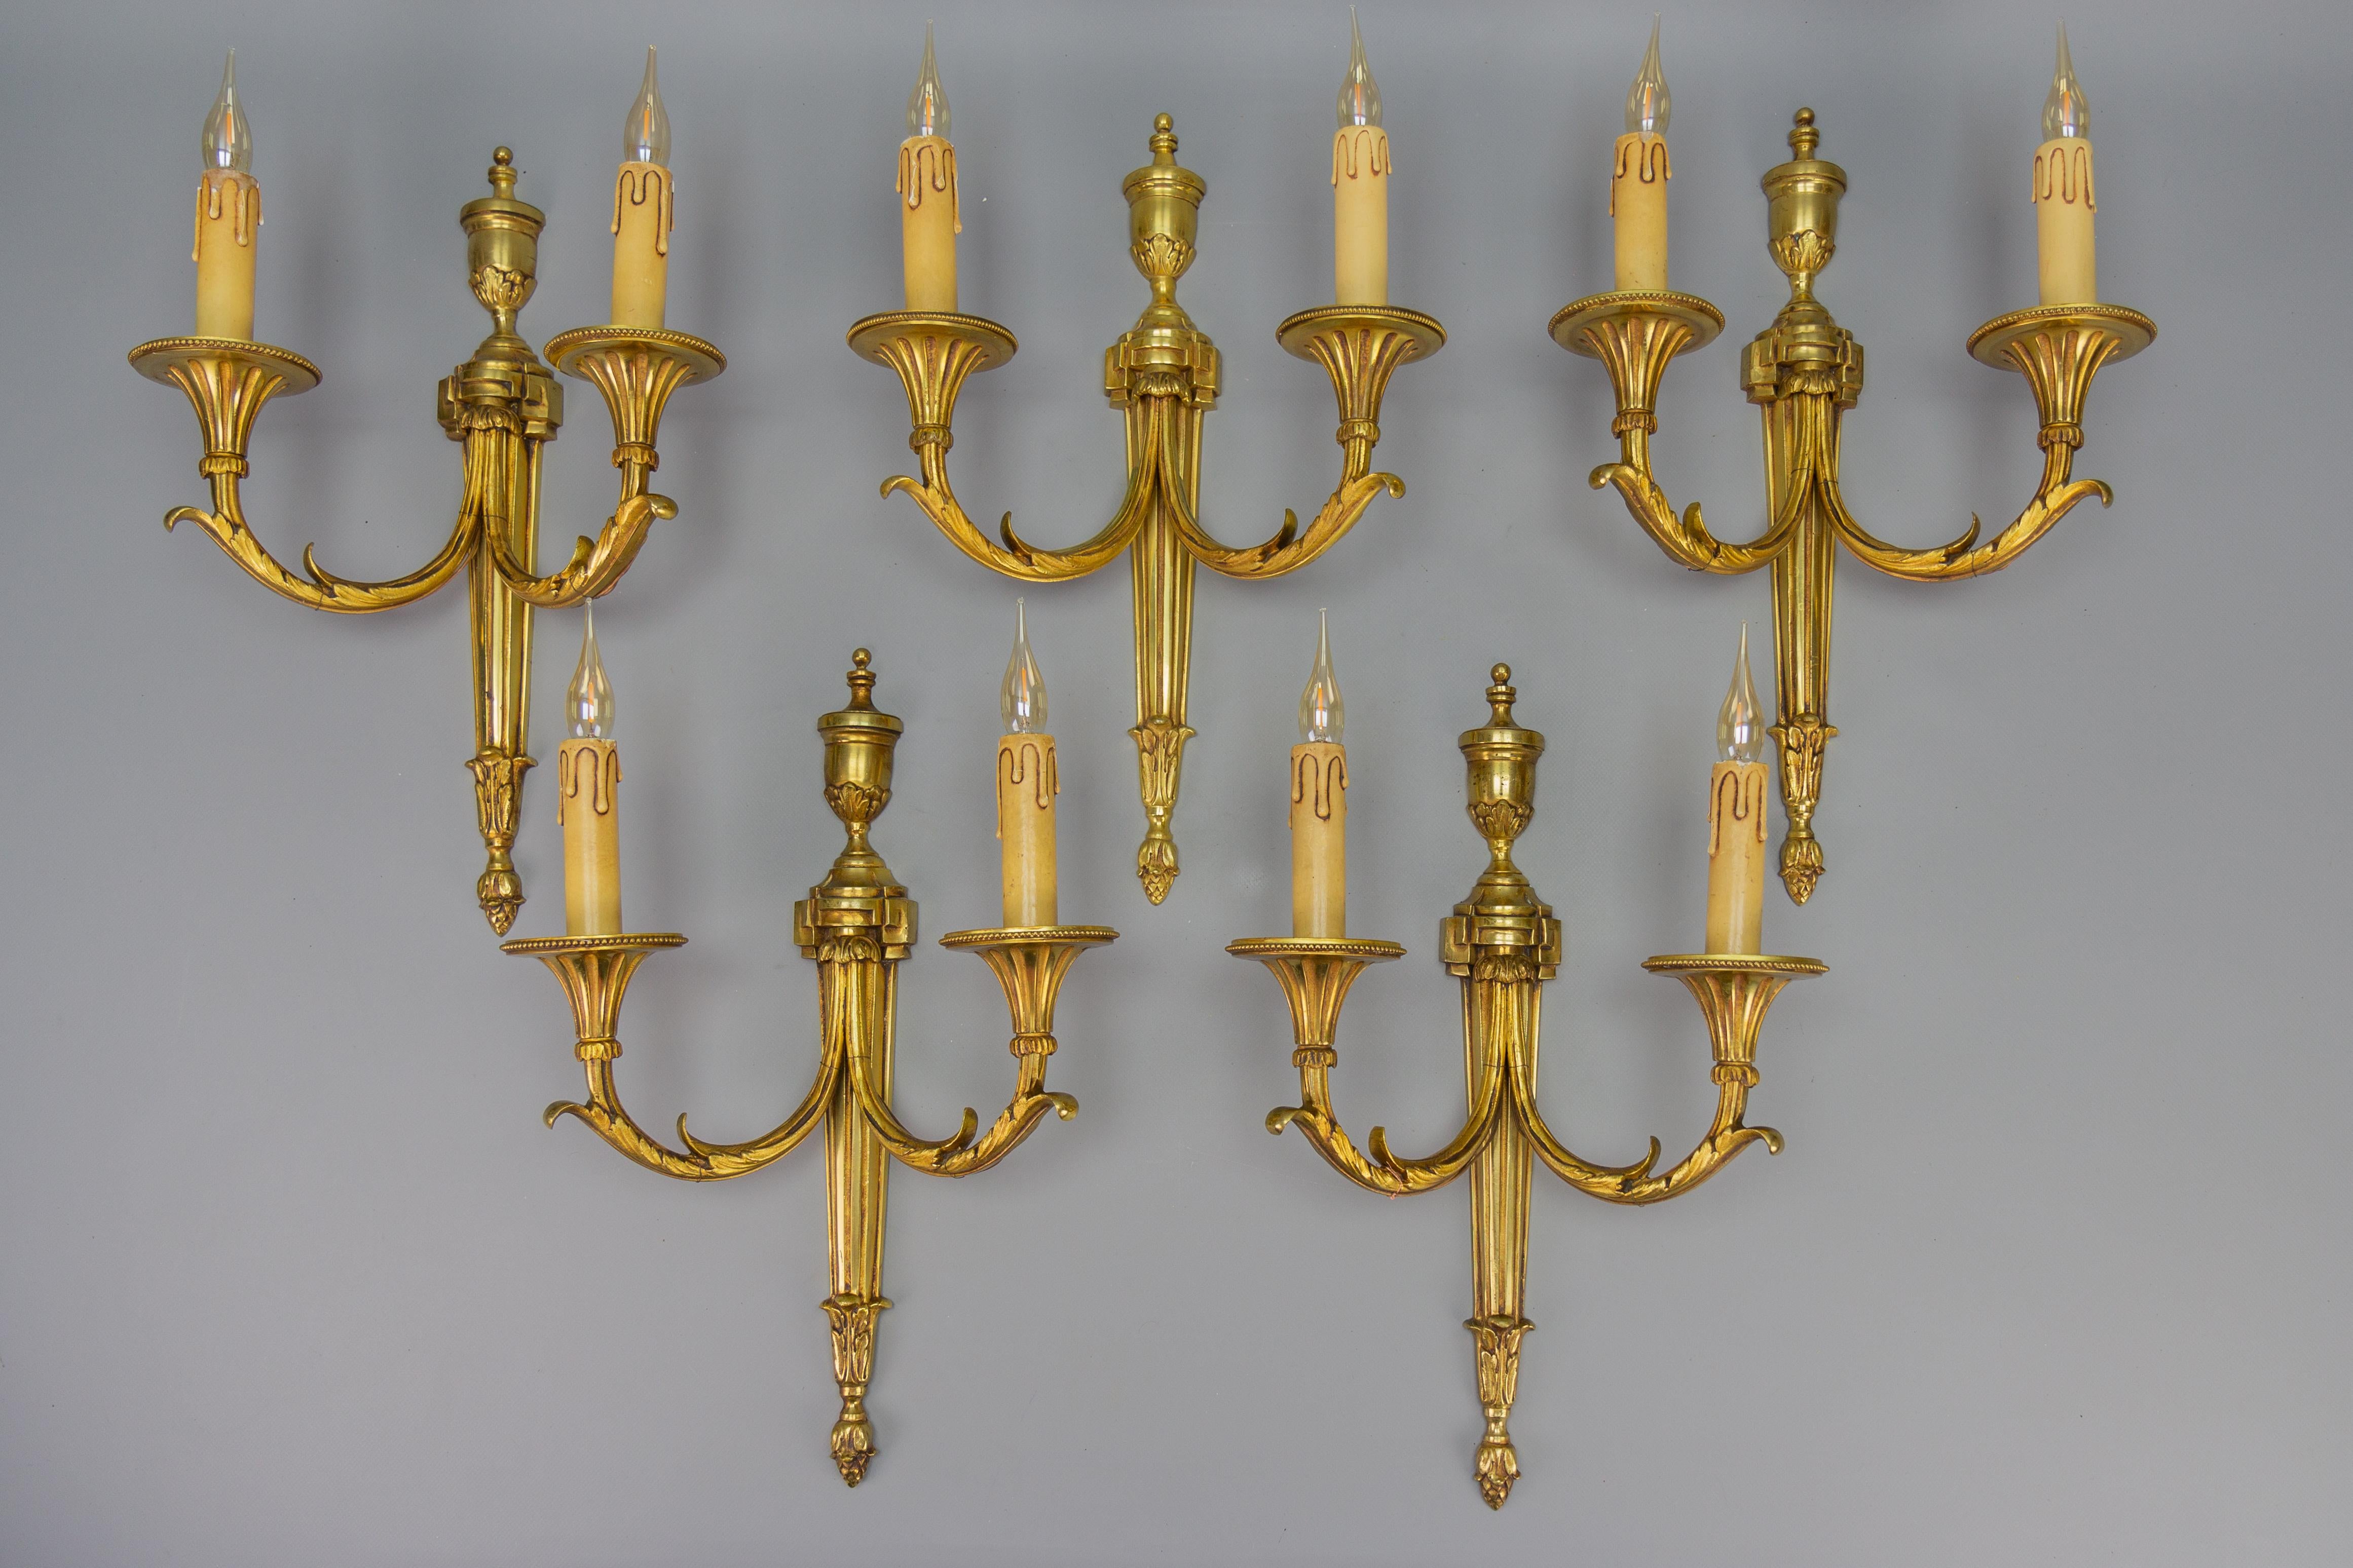 Large Neoclassical Style Bronze Double Arm Wall Sconce, France, ca. 1970s
One of five large French Neoclassical style bronze candelabra-form wall sconces with elegant urn finials and two arms adorned with acanthus leaves terminating in candlestick